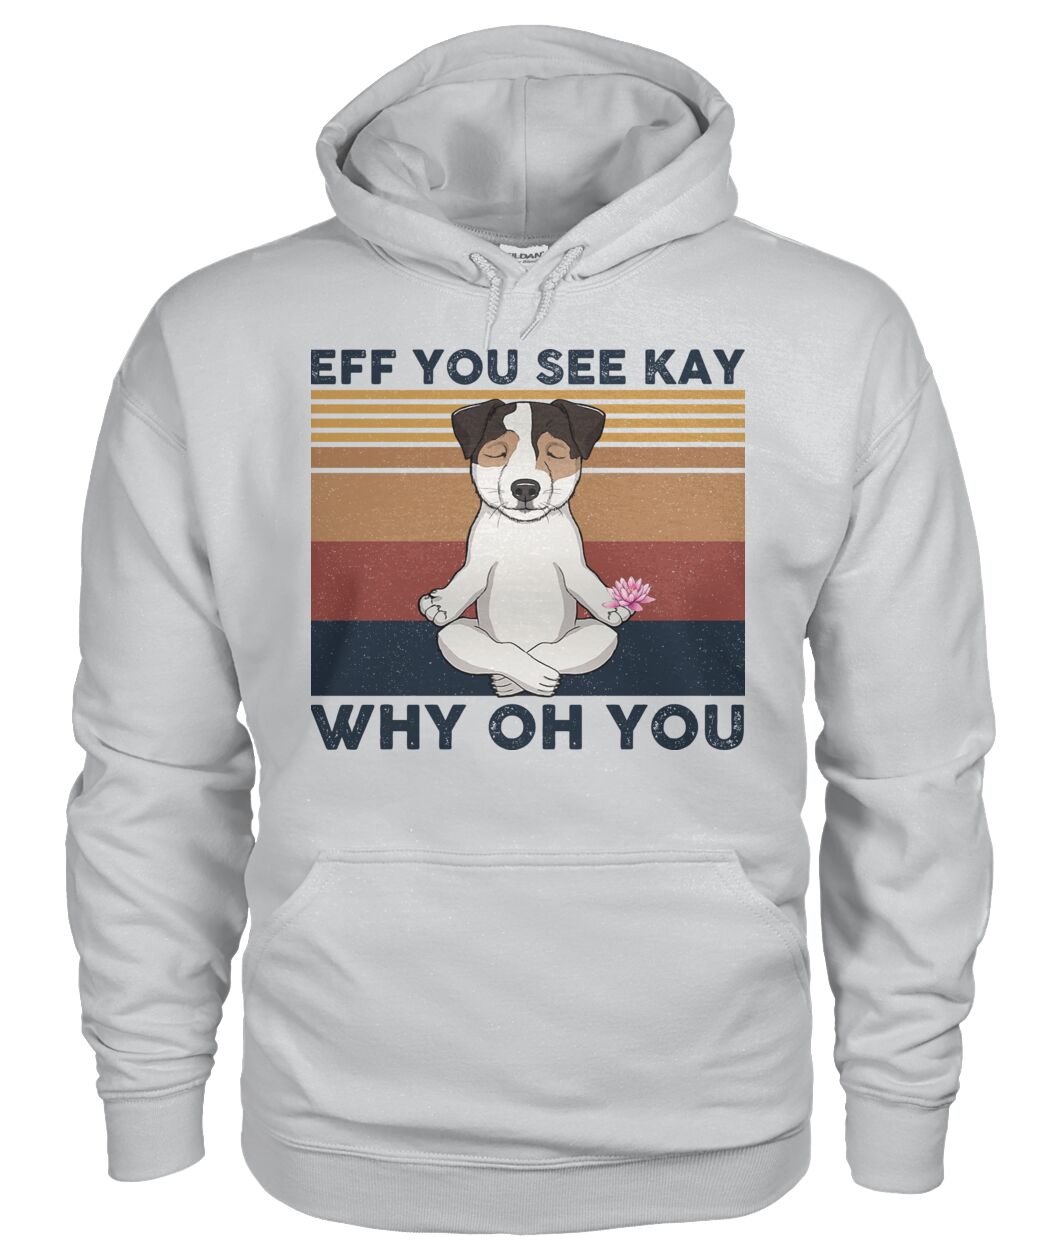 Jack Russell Yoga Eff You See Kay Why Oh You 3D Hoodie, Shirt 8